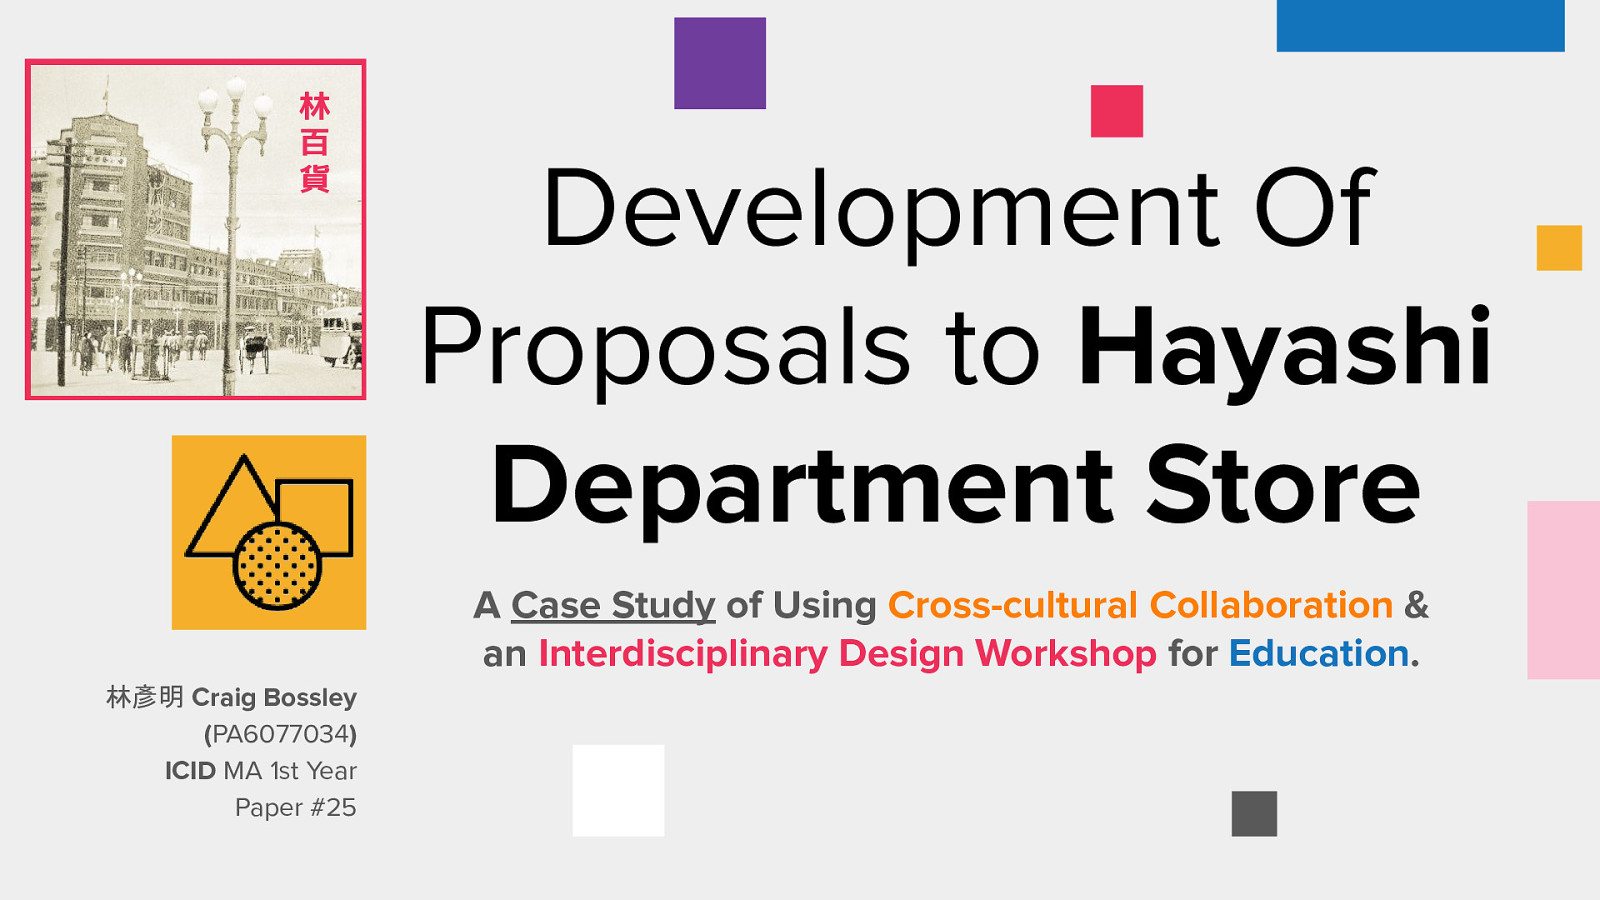 Paper: Development of Proposals to Hayashi Department Store